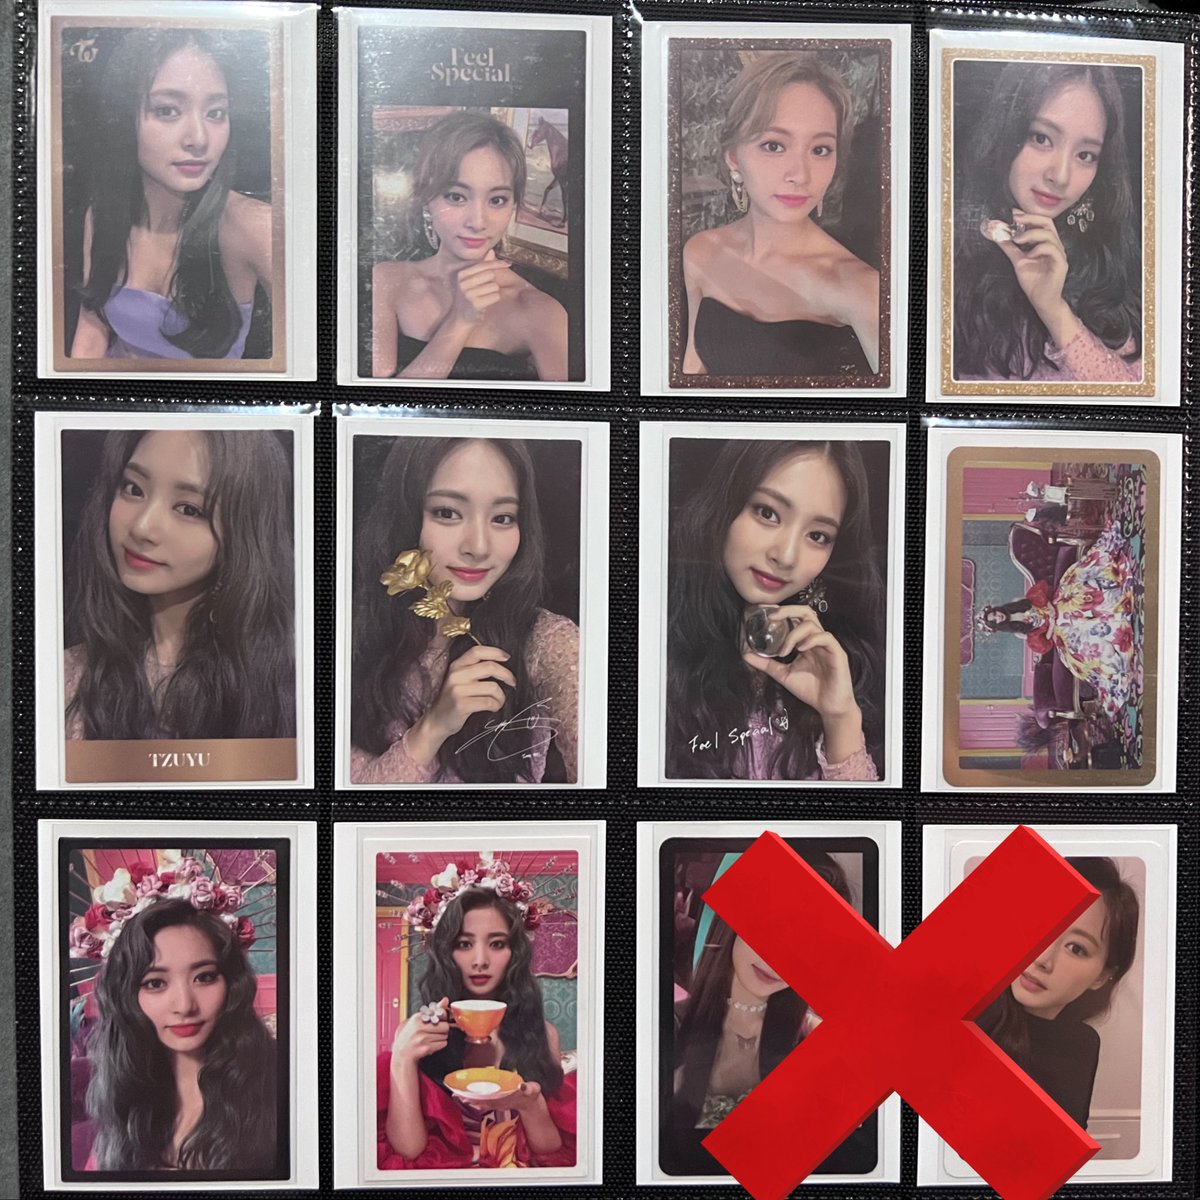 🇲🇾 only 
[wts] official twice’s tzuyu album pc set

💸 :
feel special — RM170 (11 pcs)

💌 free postage to WM (10 - em)
💰tng, s-pay, bank transfer

‼️ only selling as a set, don’t ask to buy individual cards

#pasartwice #wtstwice @pasartwice